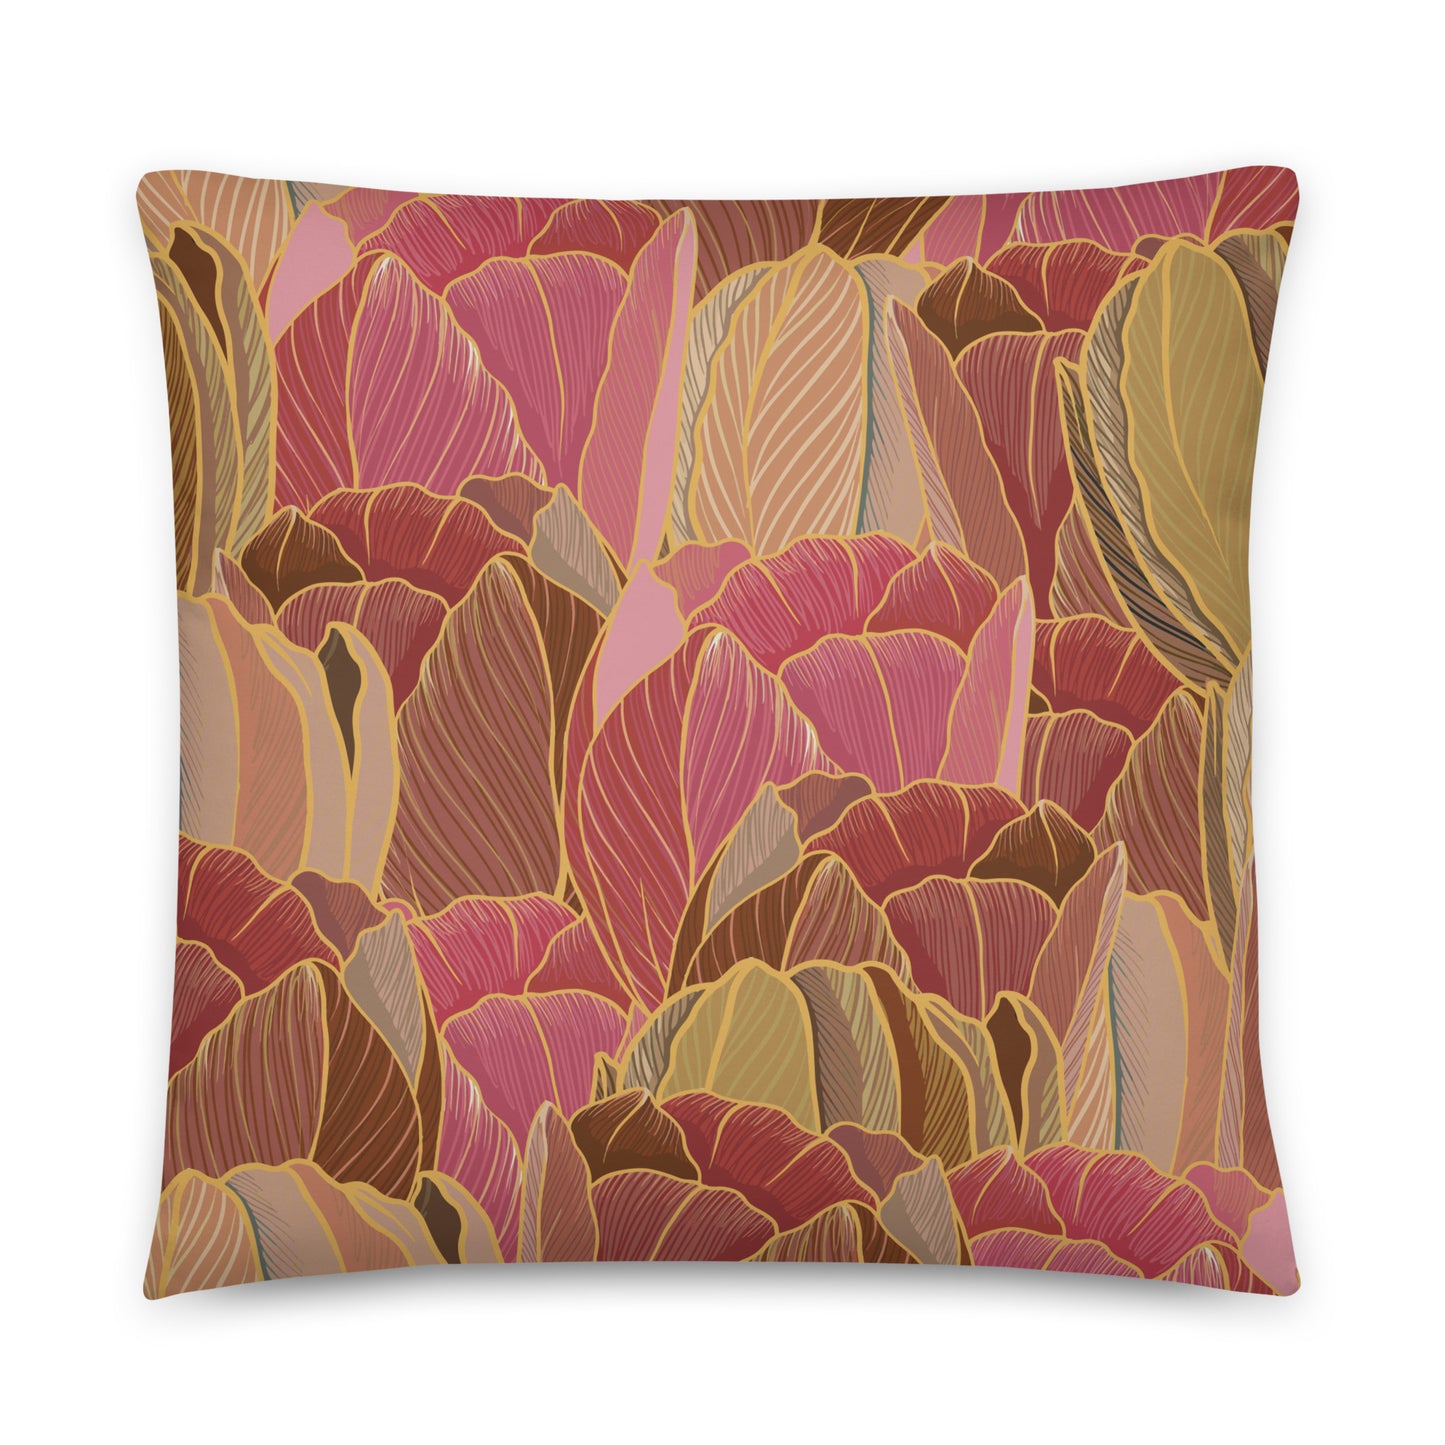 Tulip - Sustainably Made Pillows